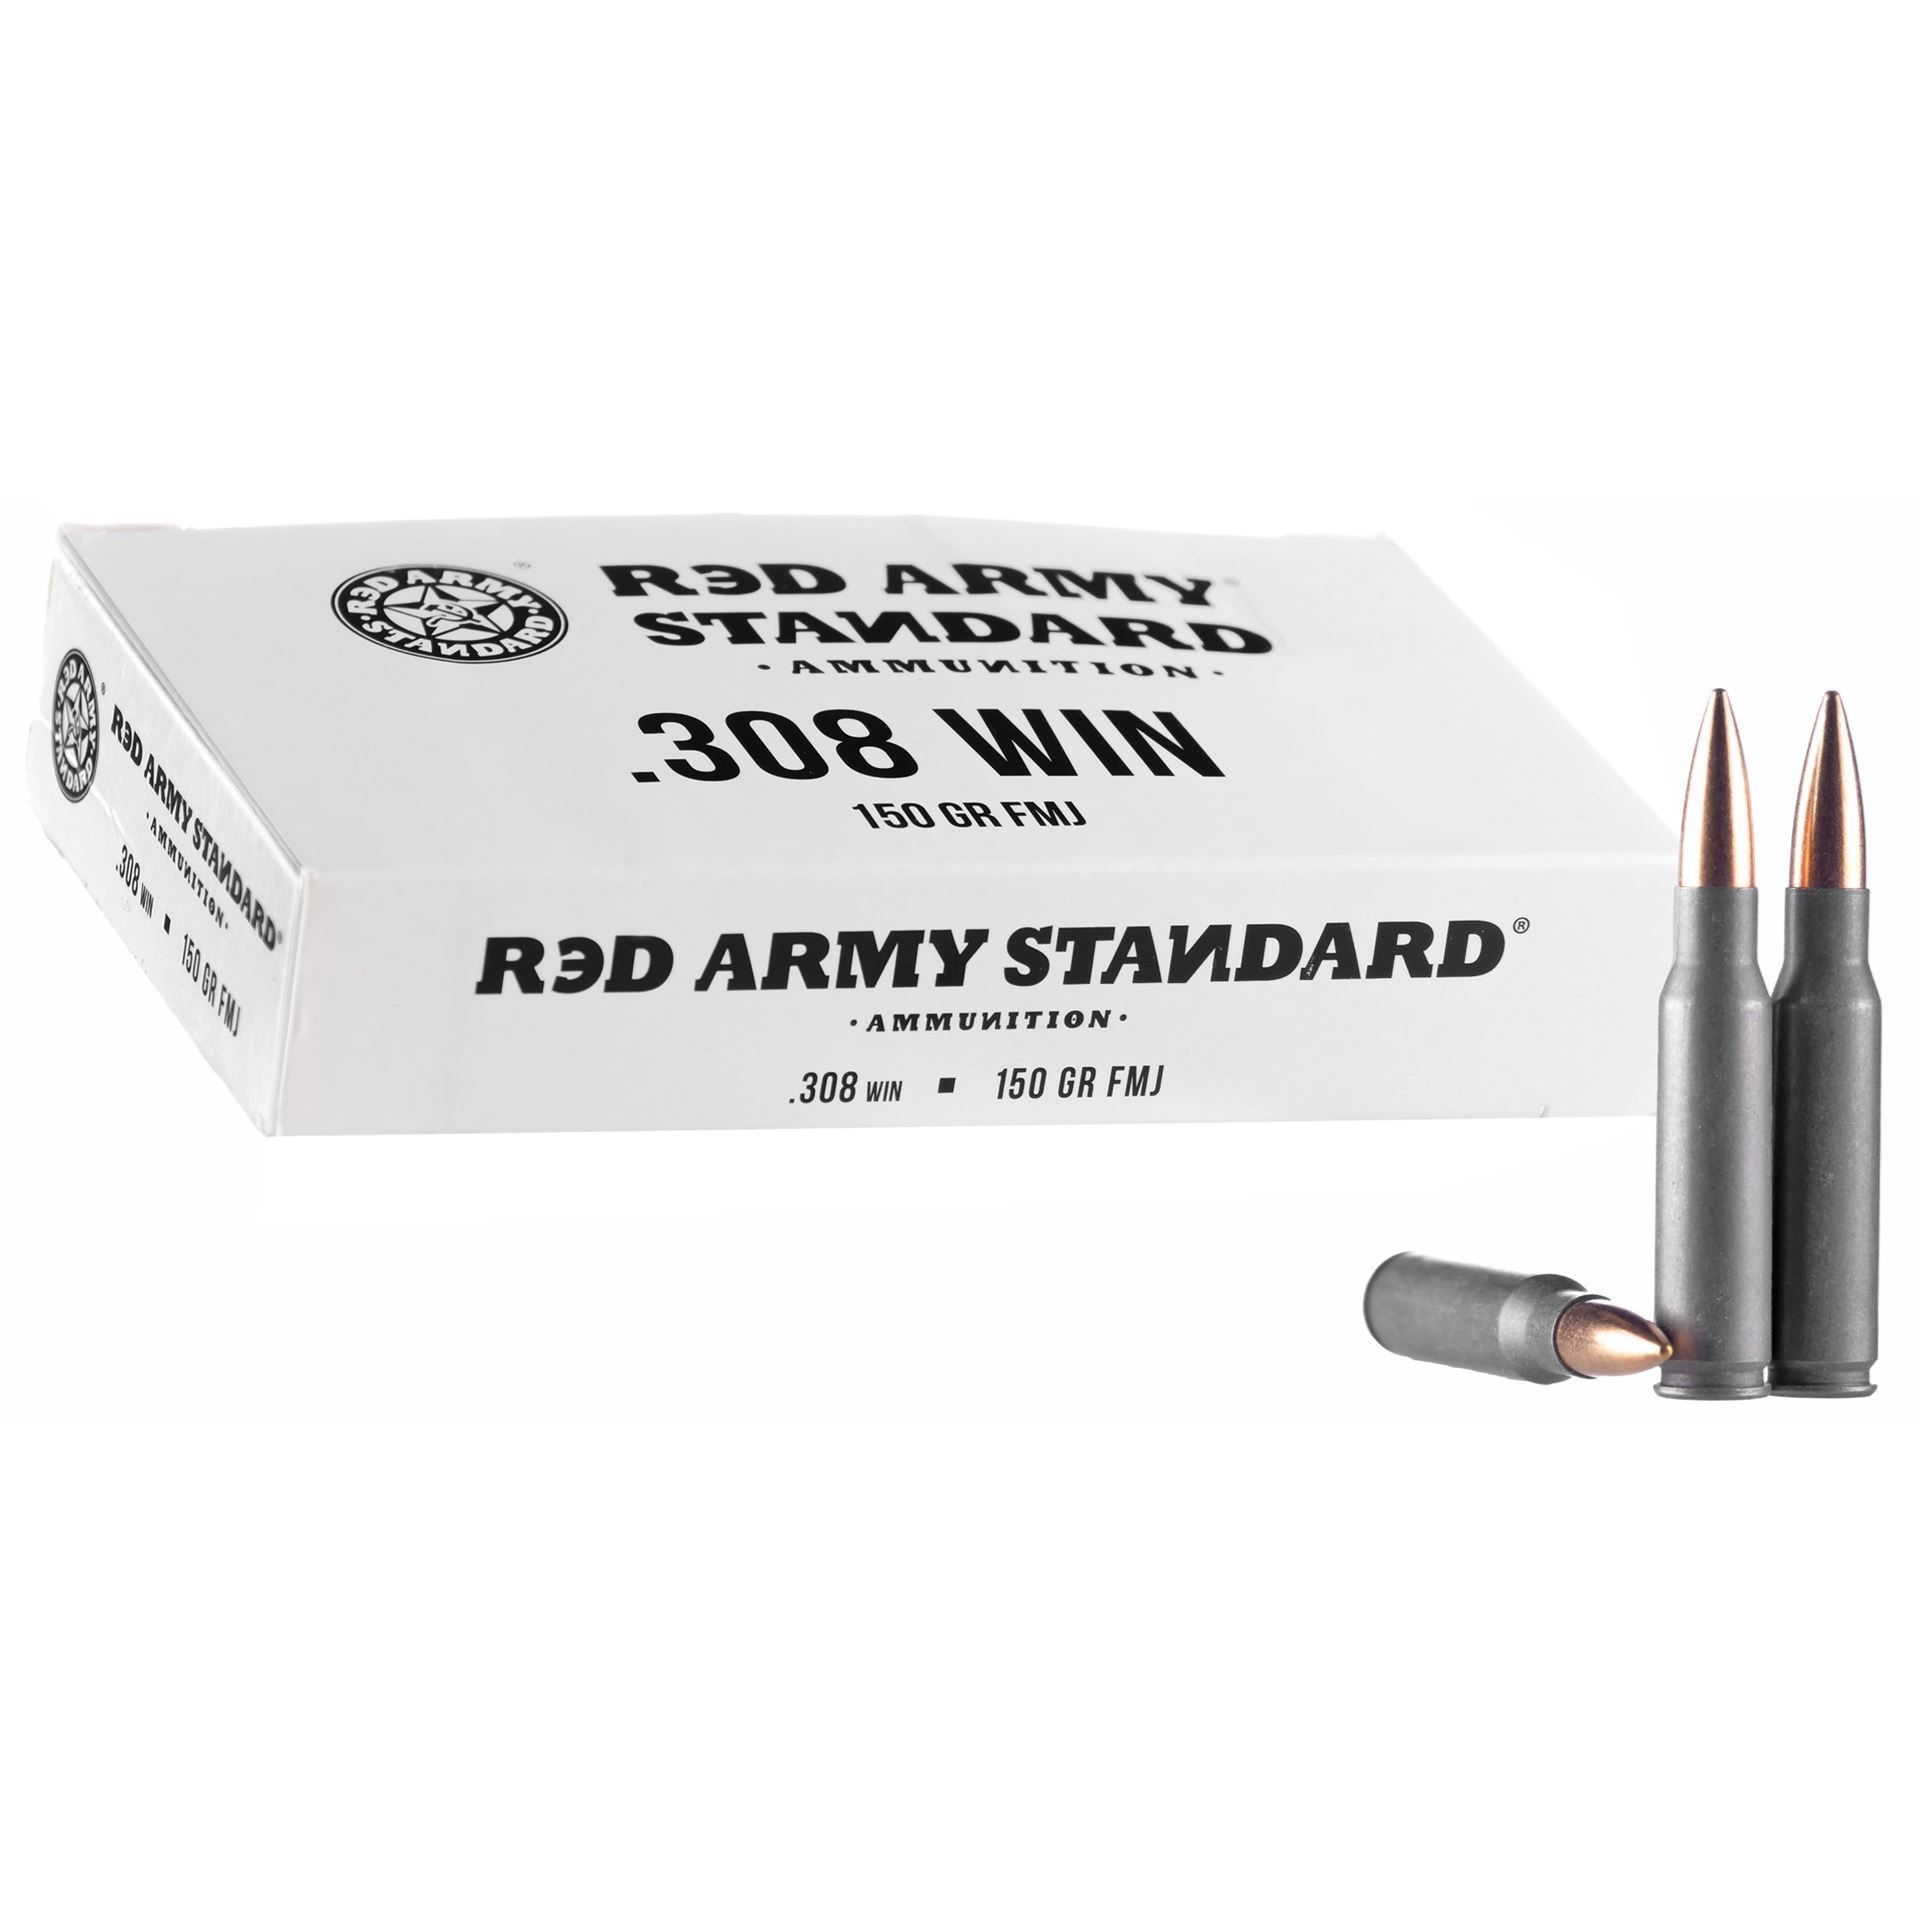 Red Army Standard 308 Win 150 Grain FMJ Ammunition 500 Rounds ...